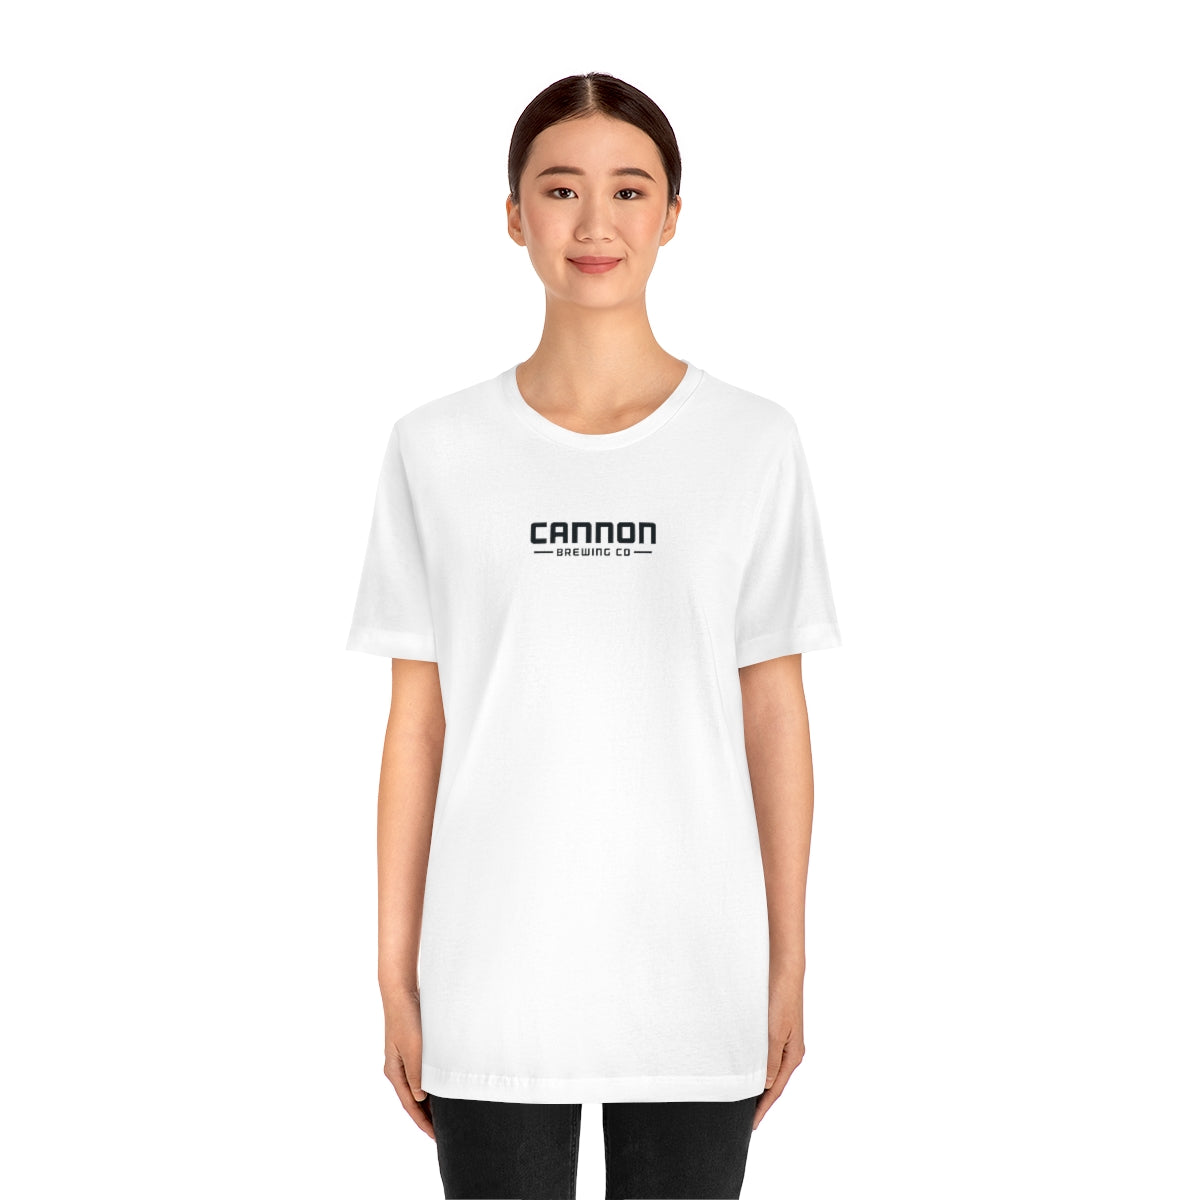 Cannon Brewing Co Race Team - Official T-Shirt